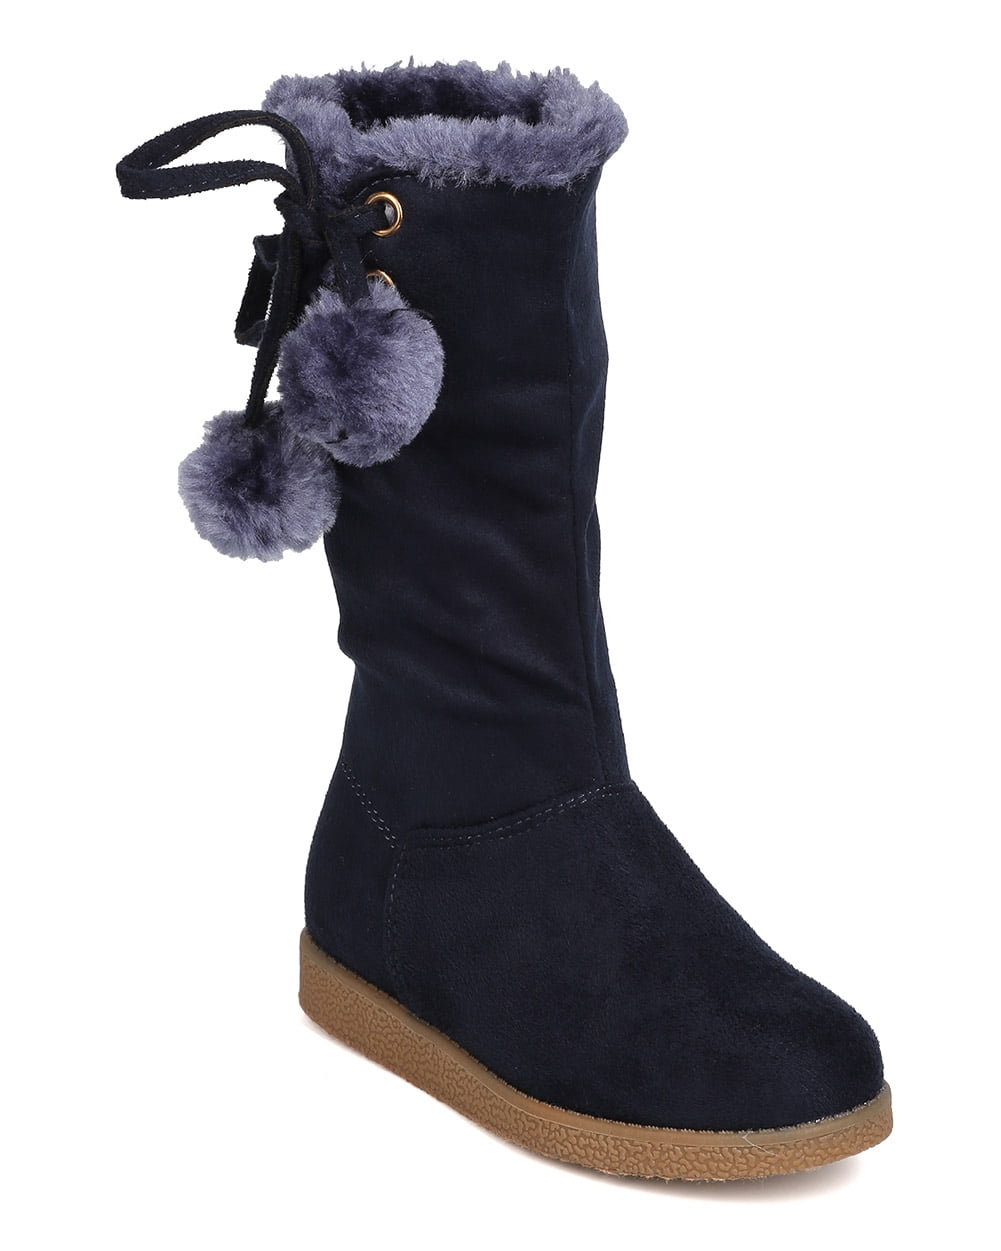 NEW Purple 121U pm Girls Piper Aany 11340 Fur-lined Faux Suede boot 